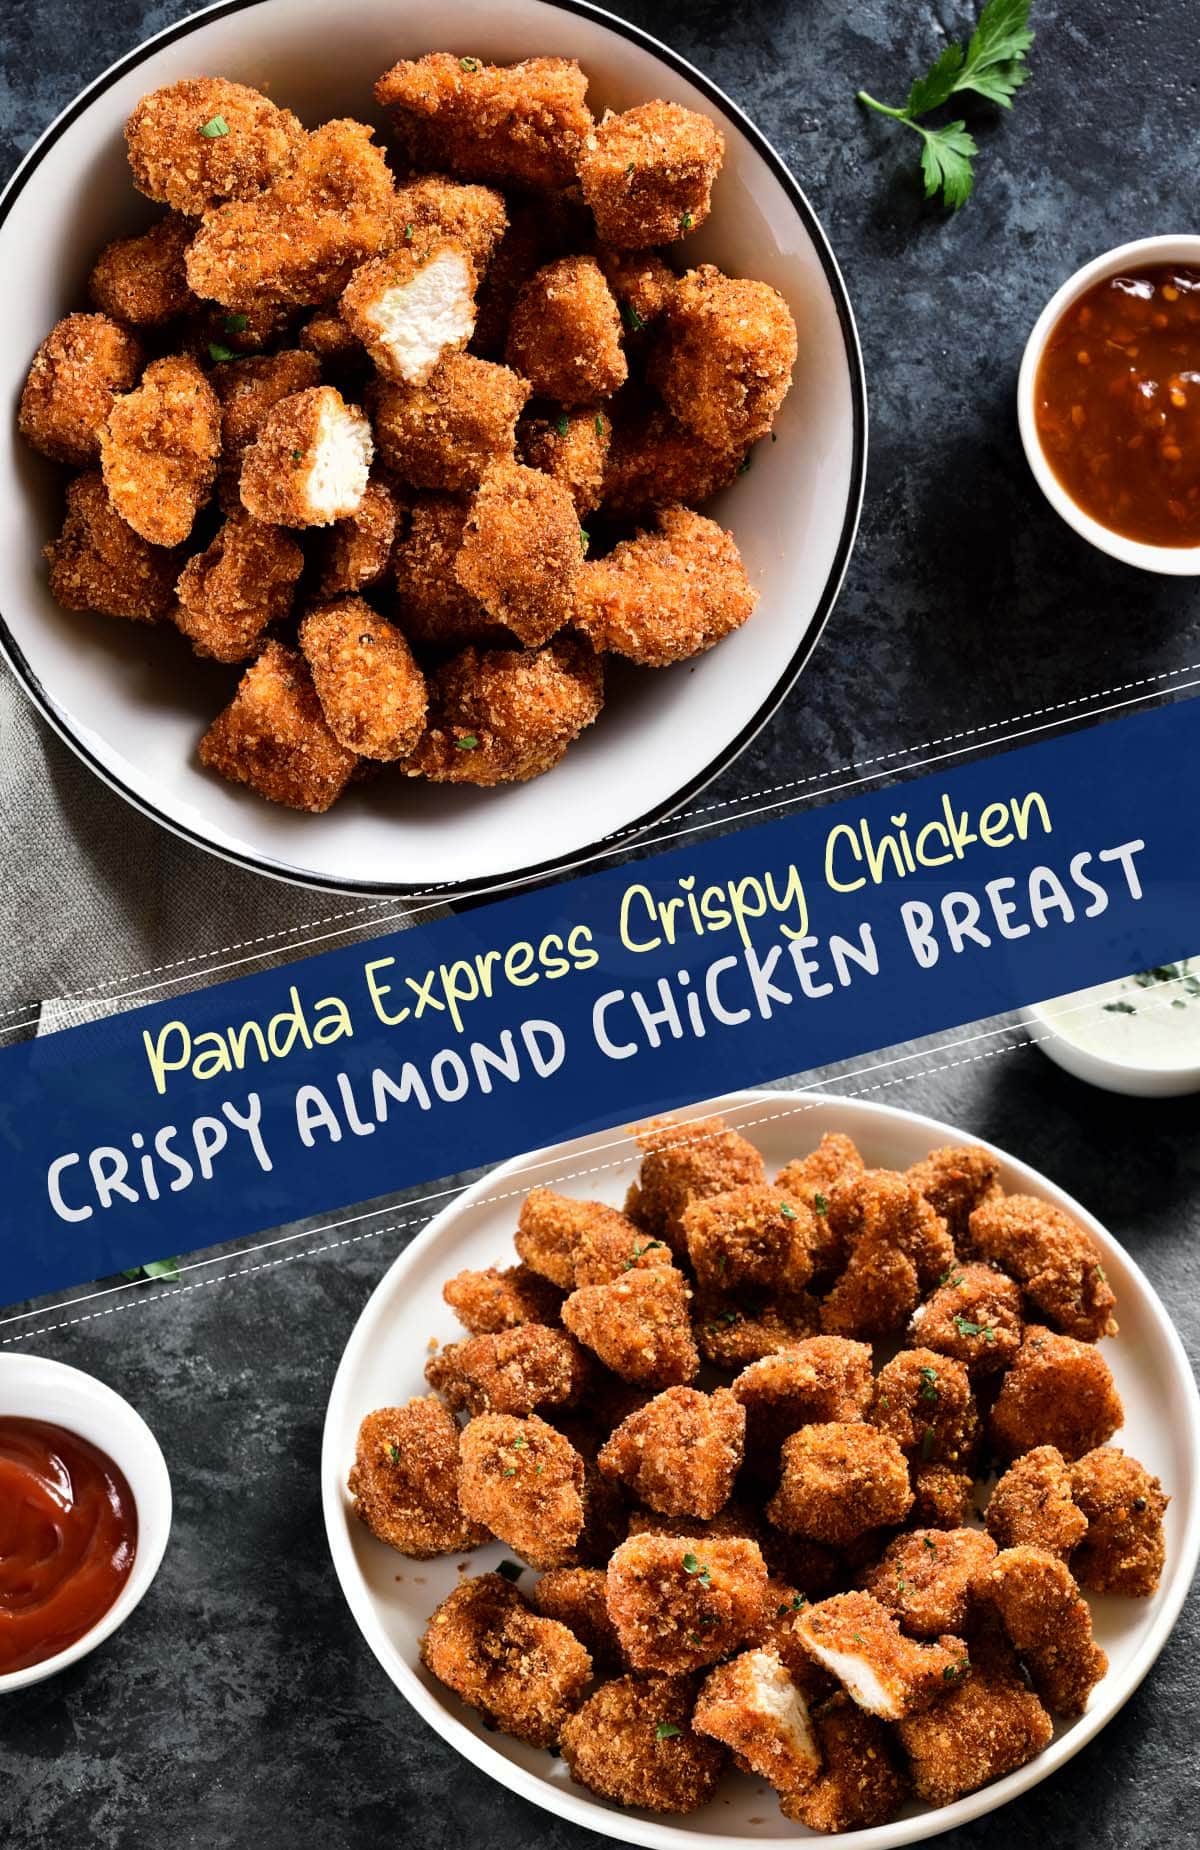 Crispy almond chicken breast is a delicious and popular dish that features juicy chicken breasts coated in crispy almond breading.